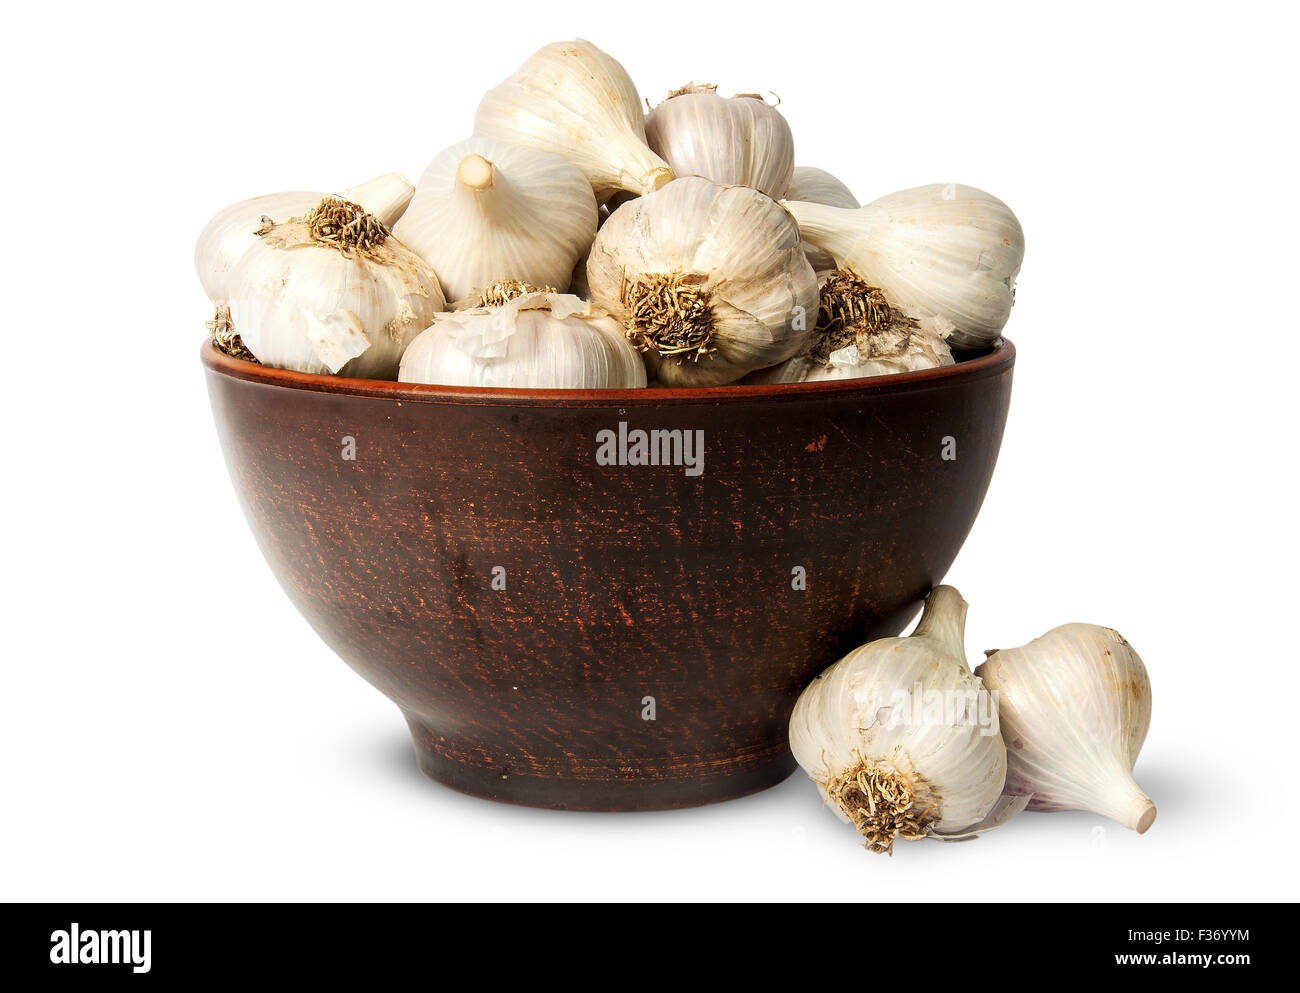 Whole head of garlic in ceramic bowl isolated on white background Stock Photo